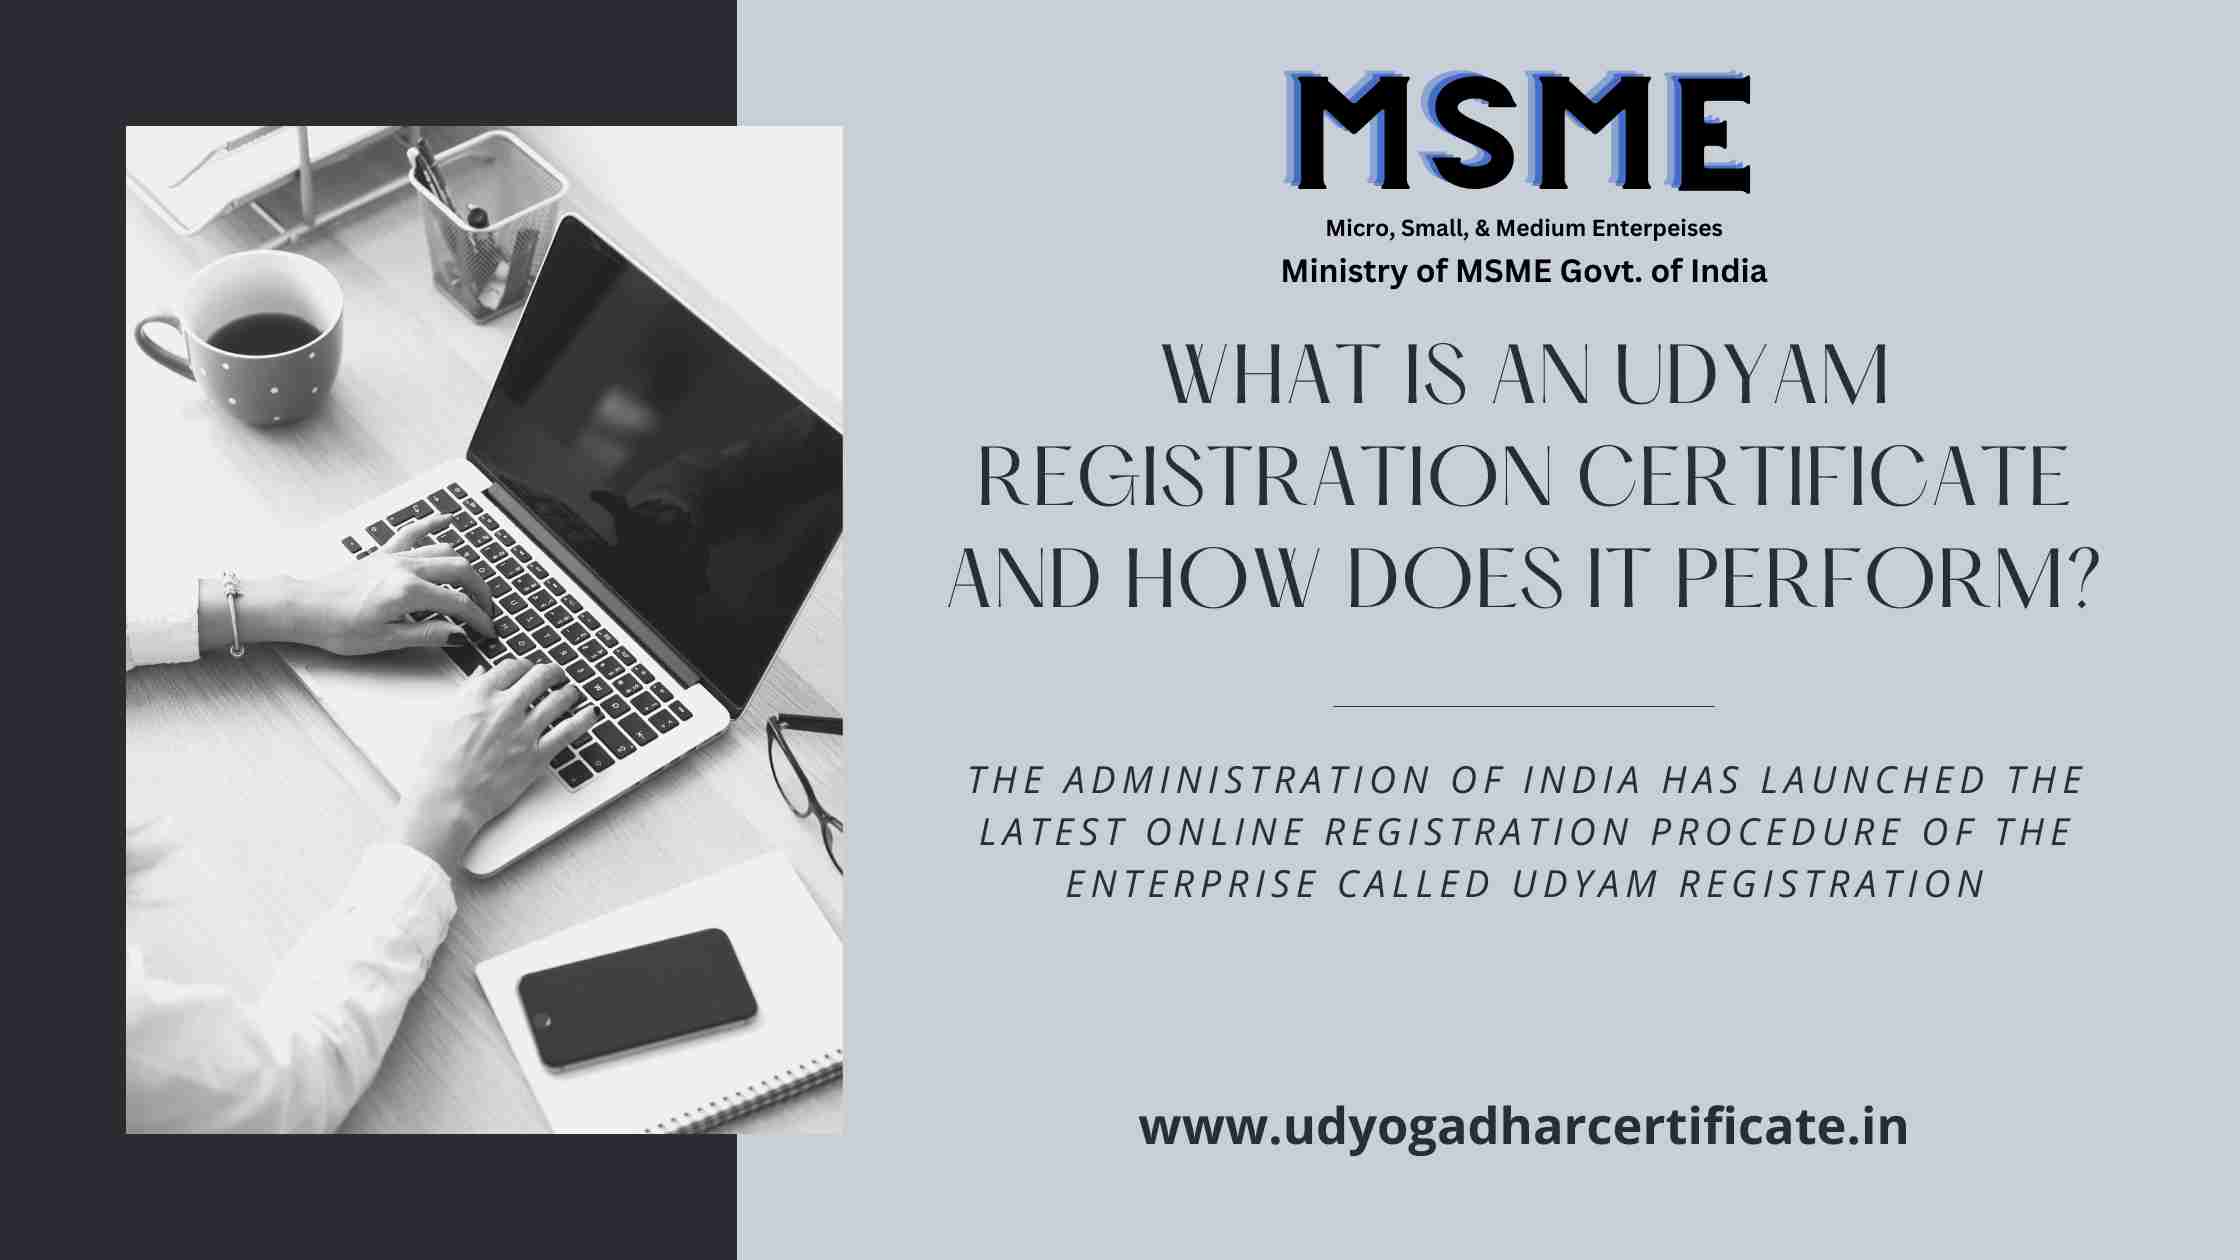 What is an Udyam Registration Certificate and How Does it Perform?